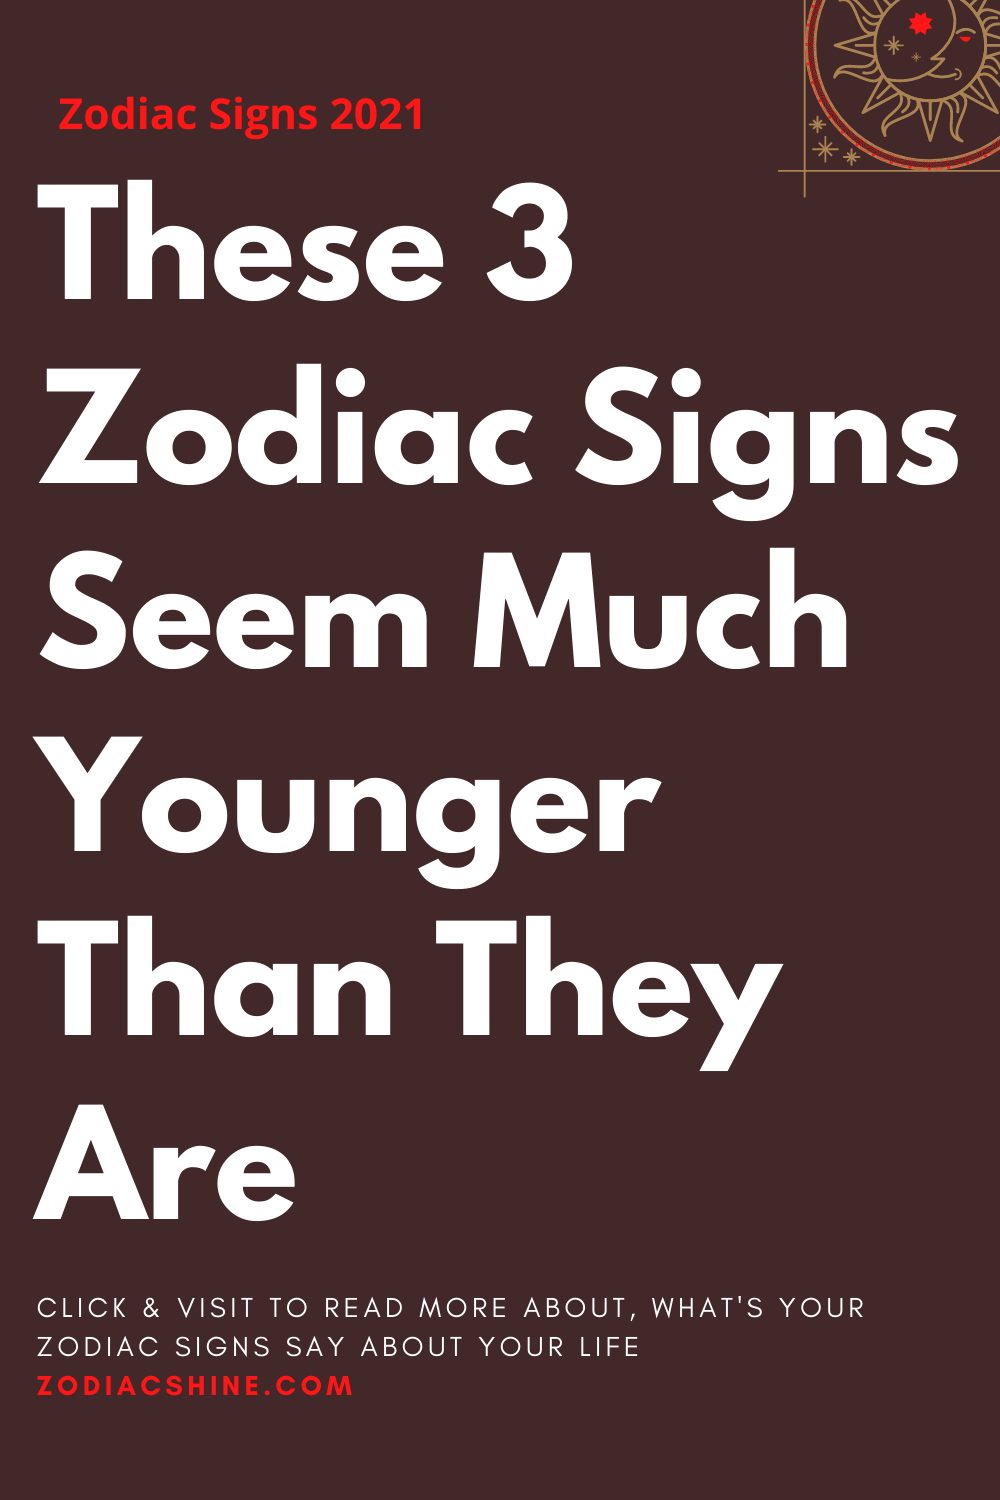 These 3 Zodiac Signs Seem Much Younger Than They Are